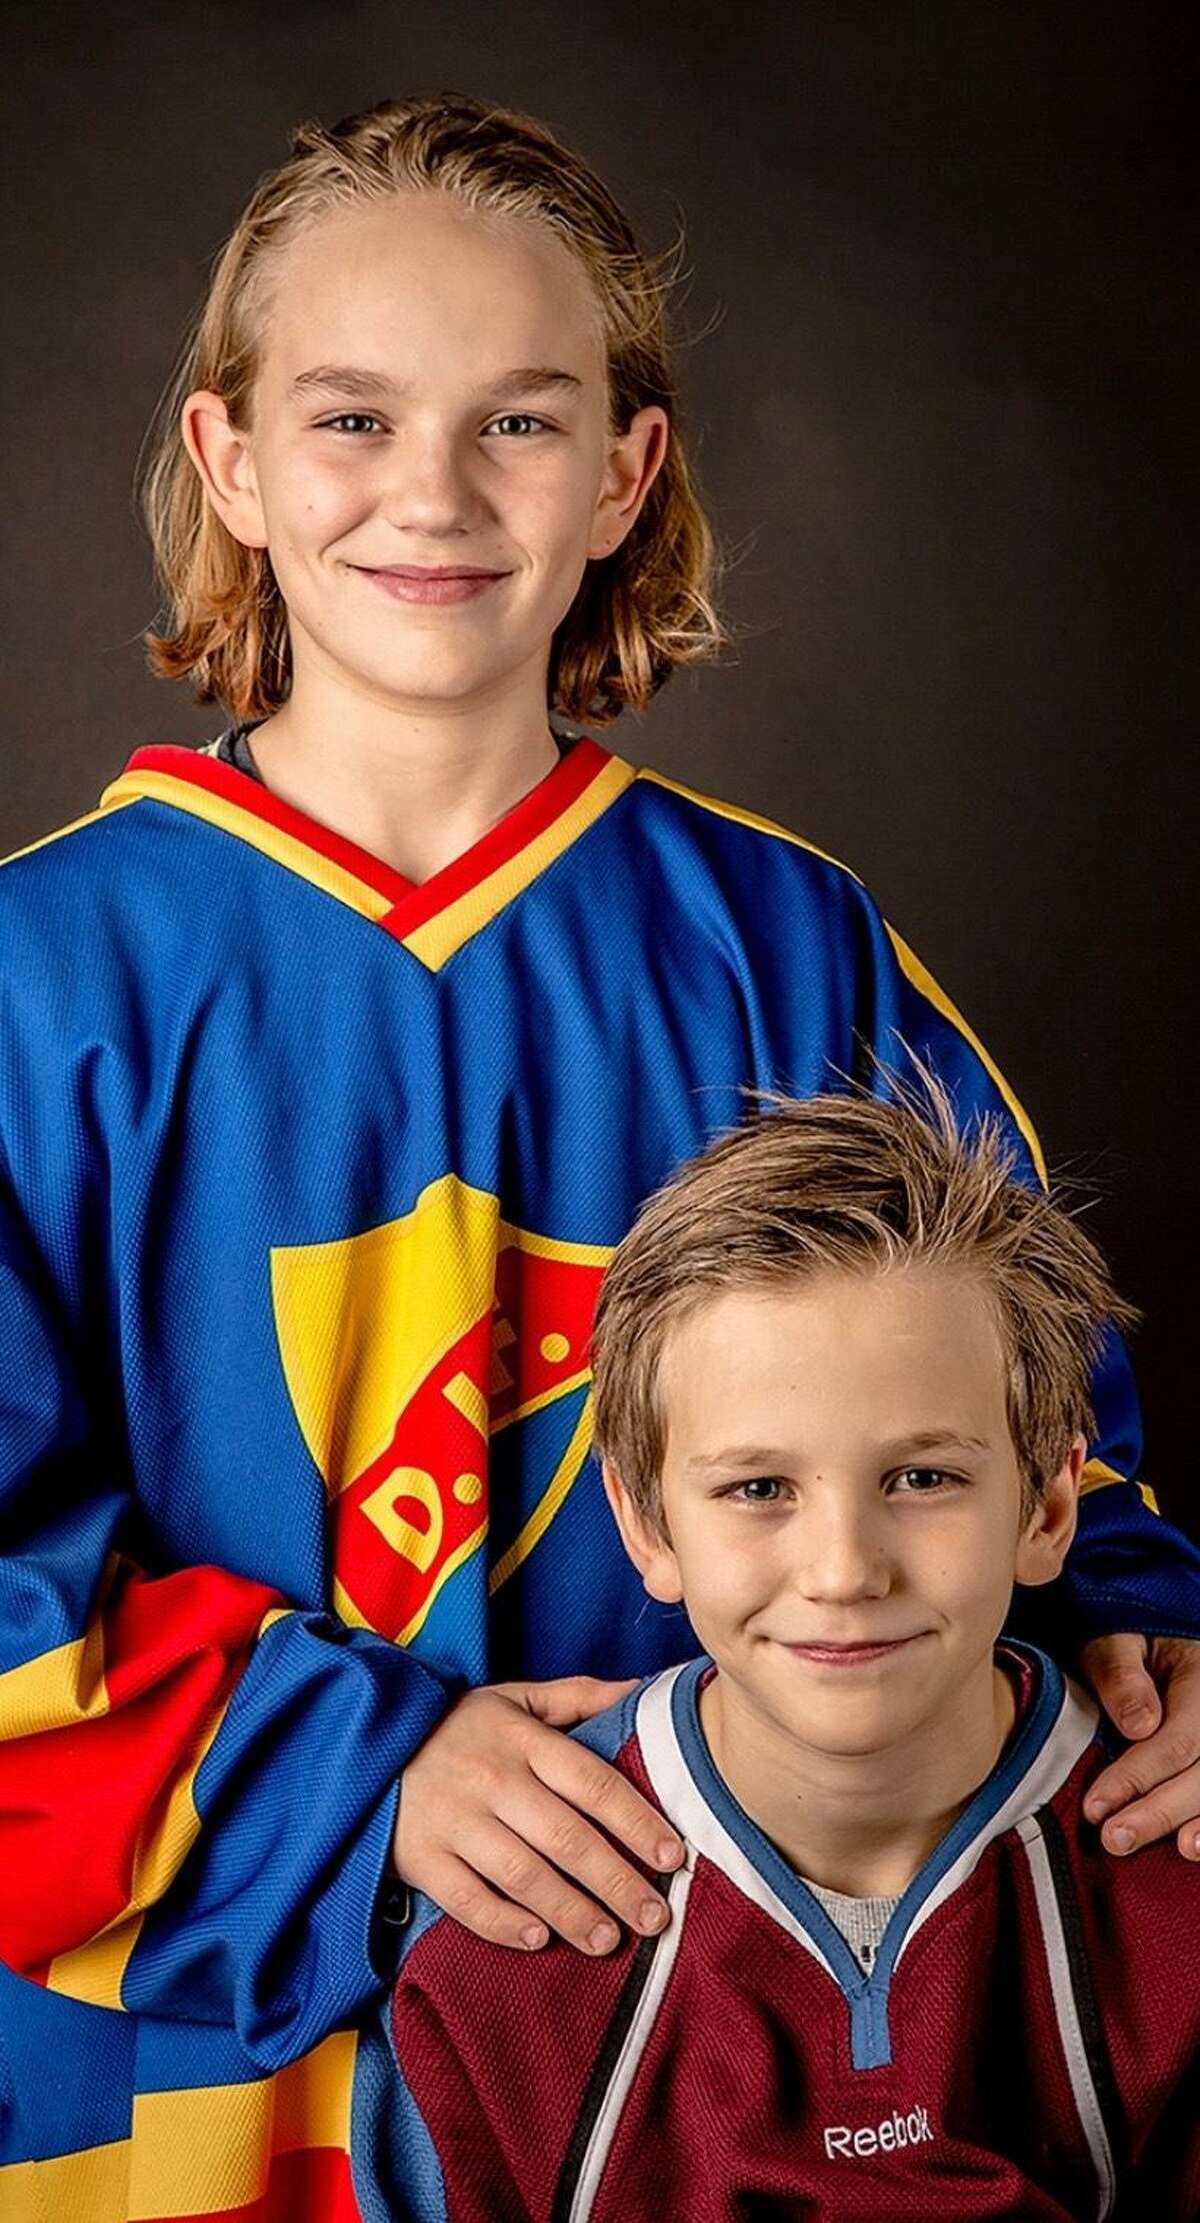 William Eklund (age 12) poses with his younger brother, Victor (age 8).